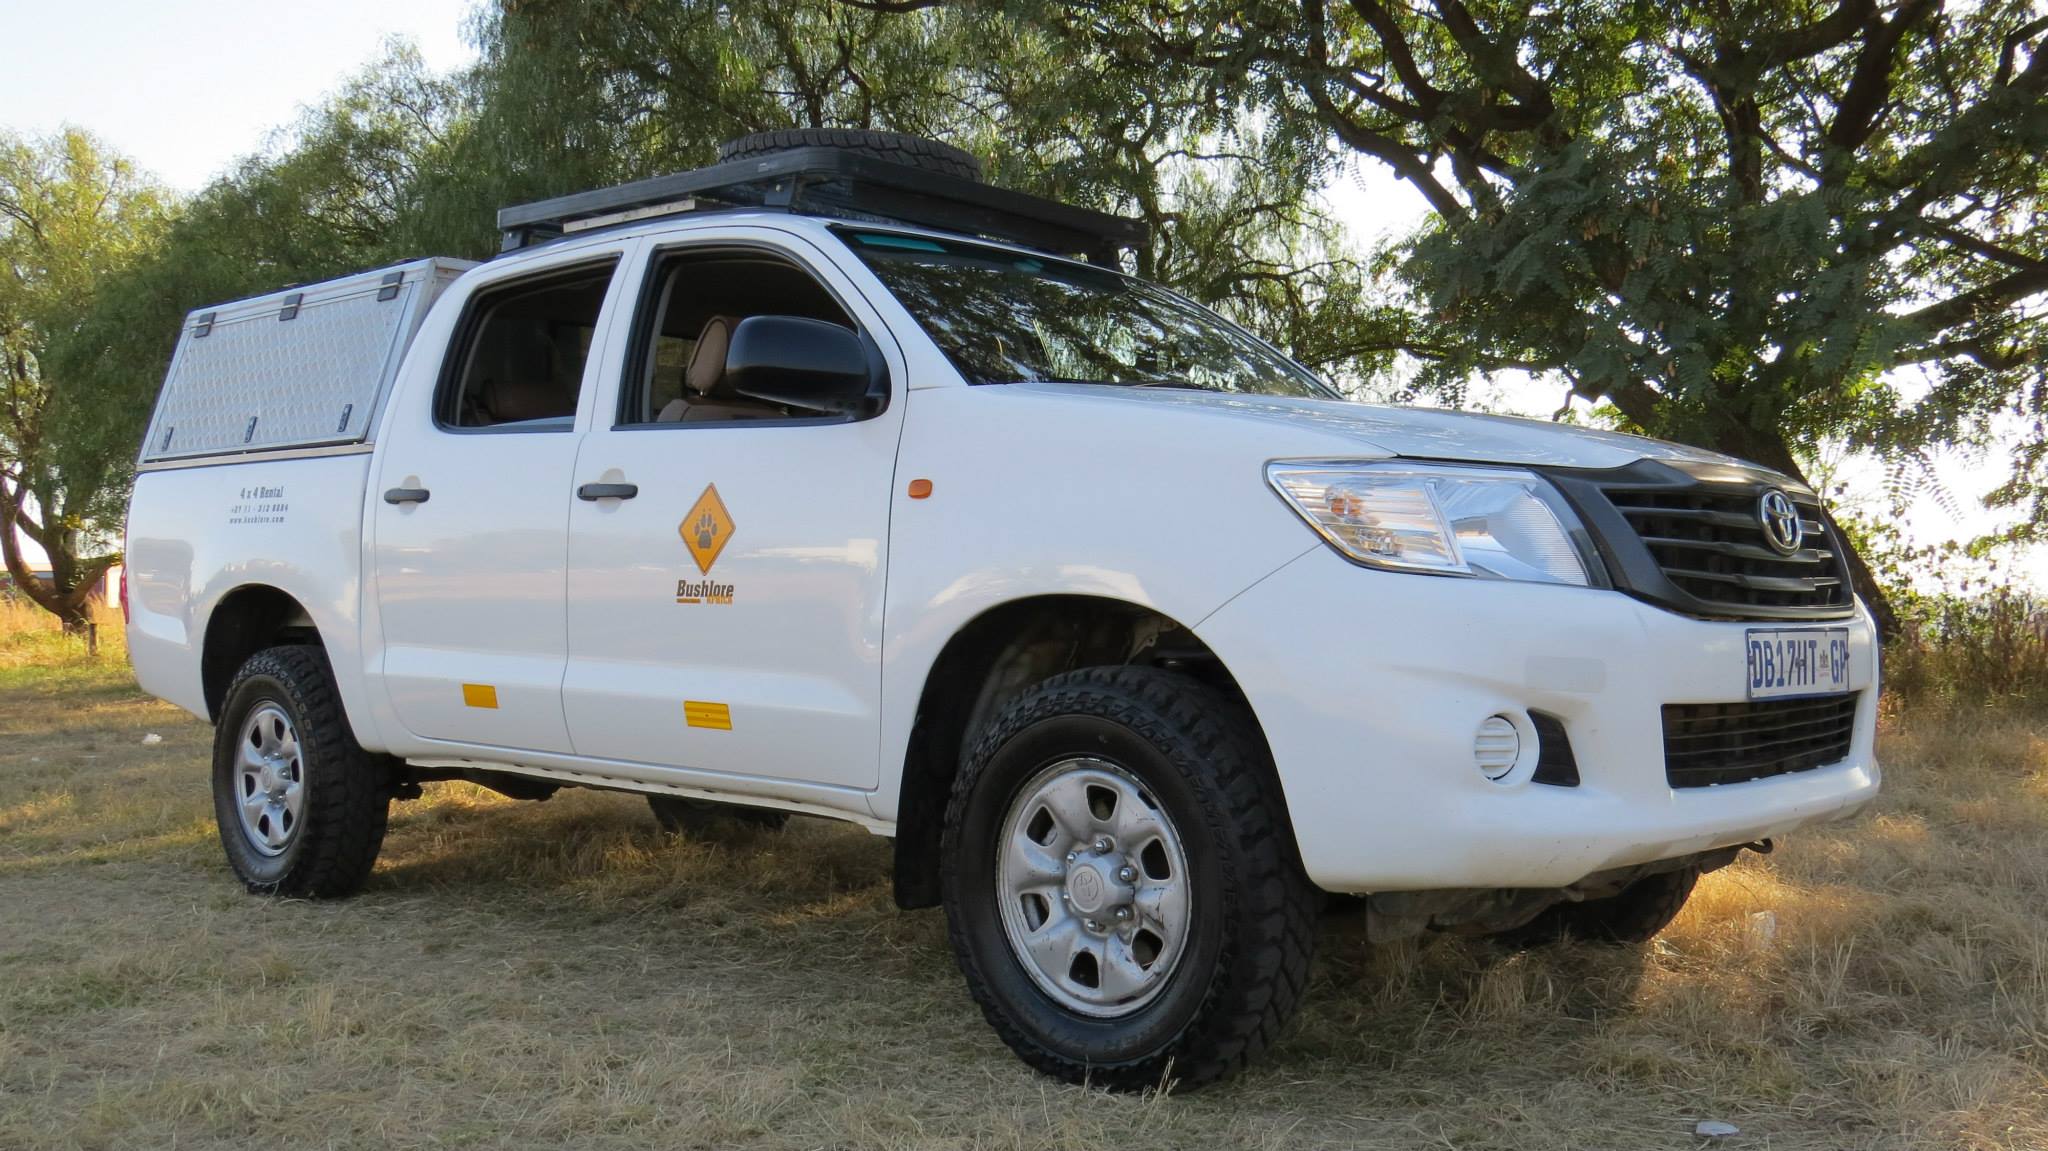 Toyota Hilux Double Cab 4×4 – no camping